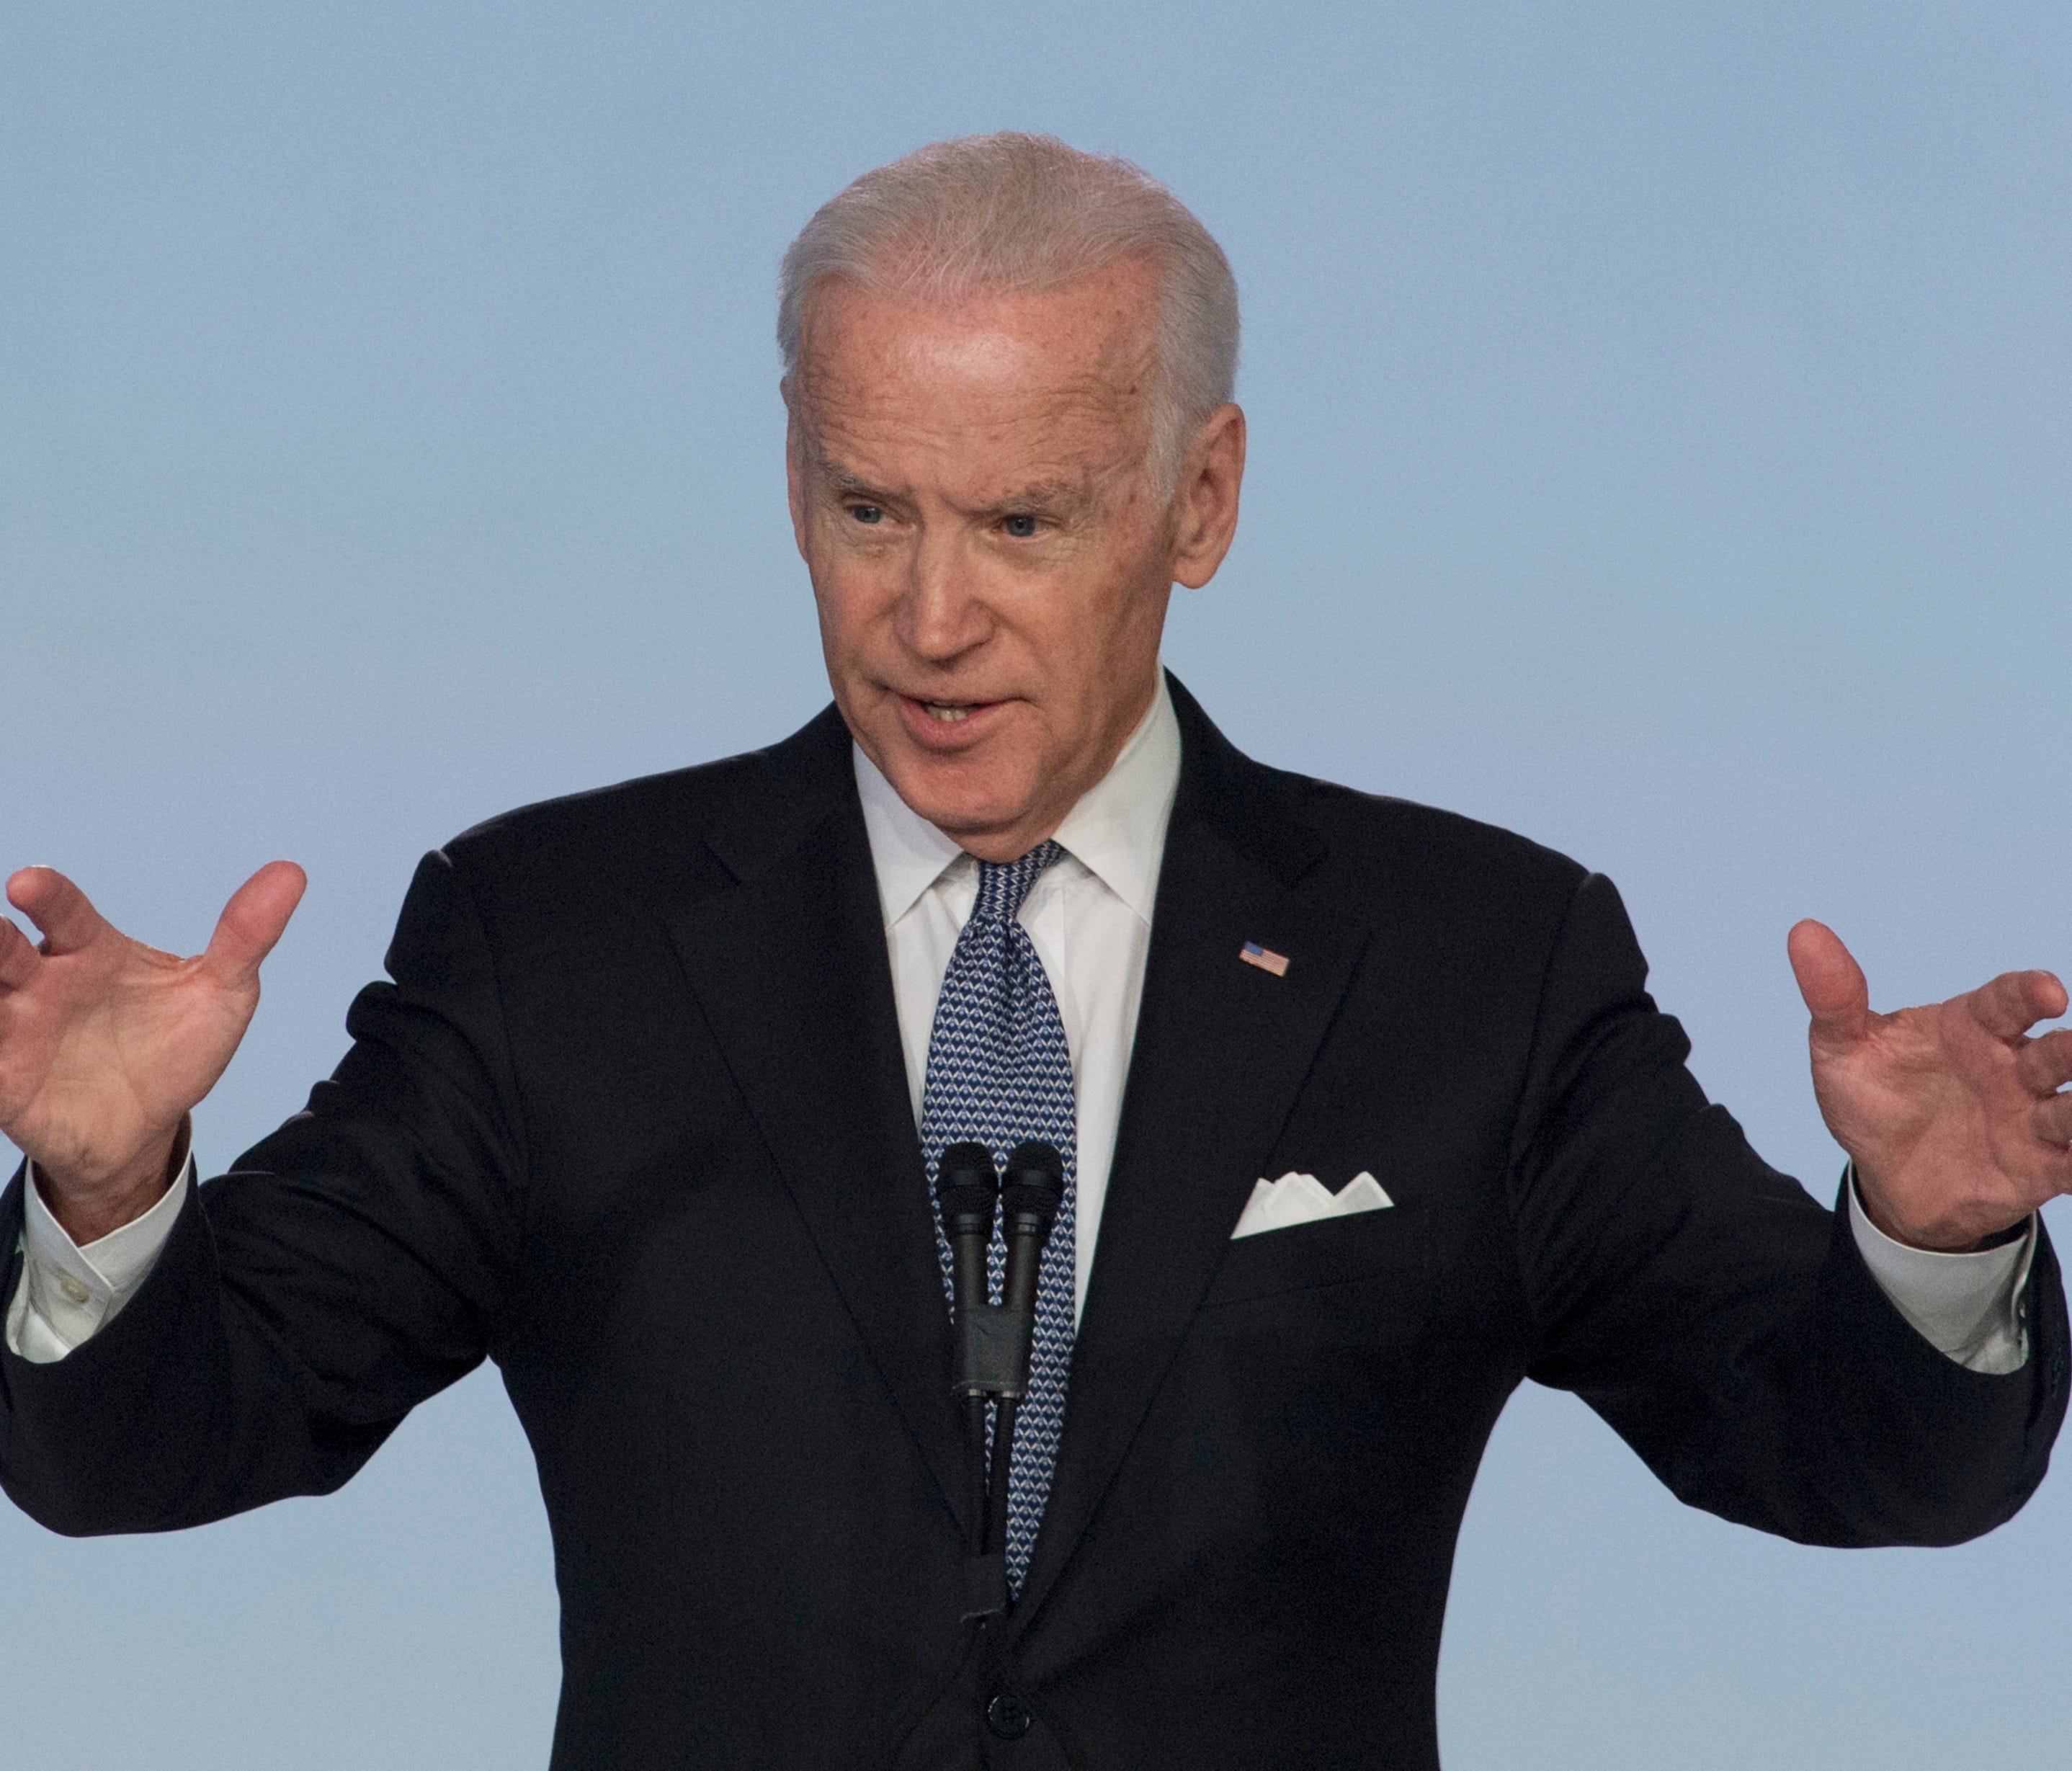 FILE - In this Feb. 3, 2017, file photo, former Vice President Joe Biden speaks about his Cancer Moonshot initiative and preventable patient safety at the 5th Annual Work Patient Safety, Science and Technology Summit in Dana Point, Calif. Organizers 